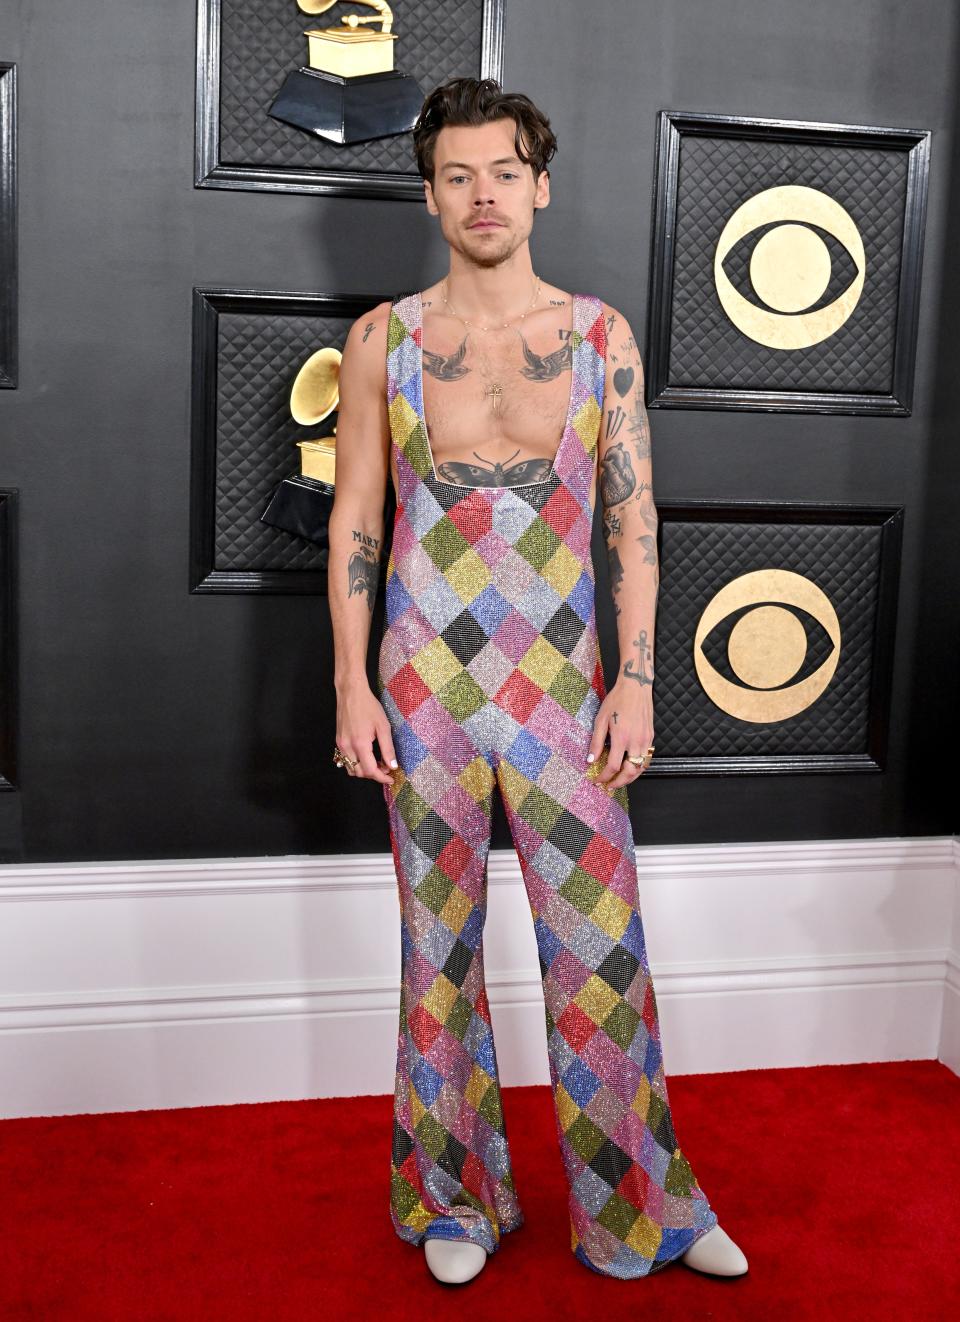 Continuing the color explosion of his <em>Love on Tour</em> looks, Harry Styles attended the 2023 Grammys in a custom crystal bodysuit made in collaboration between EGONLAB and Swarovski.